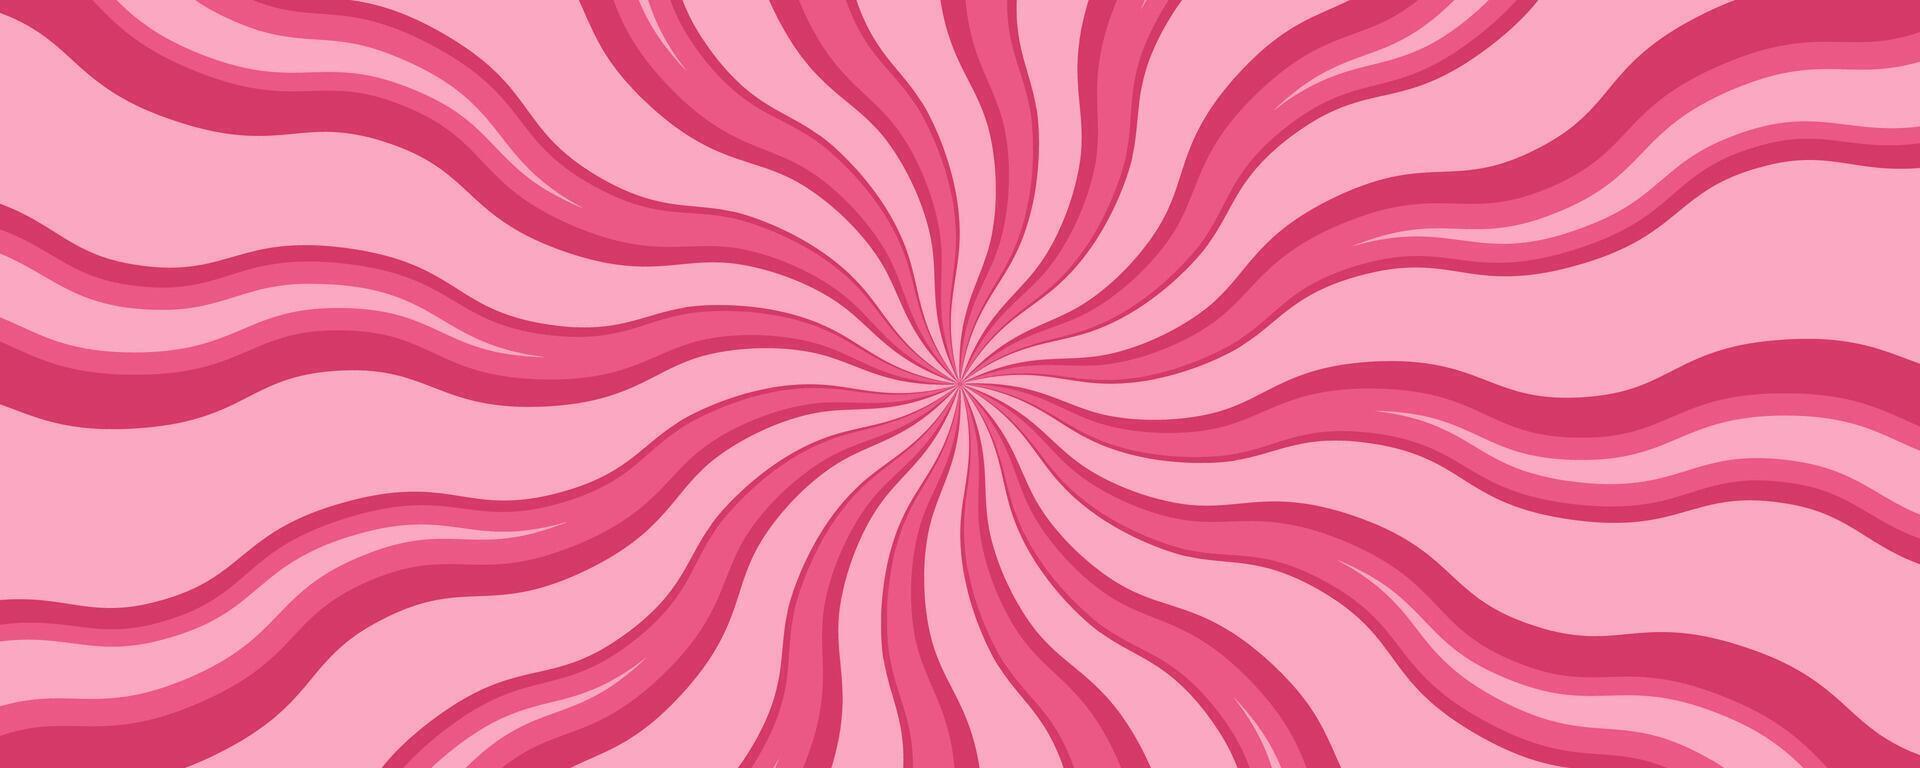 Spiral pink candy background with swirl pattern. Strawberry cream cartoon wallpaper. Sweets marshmallow and lollipop abstract twist backdrop. Sunburst psychedelic groovy stripes. vector